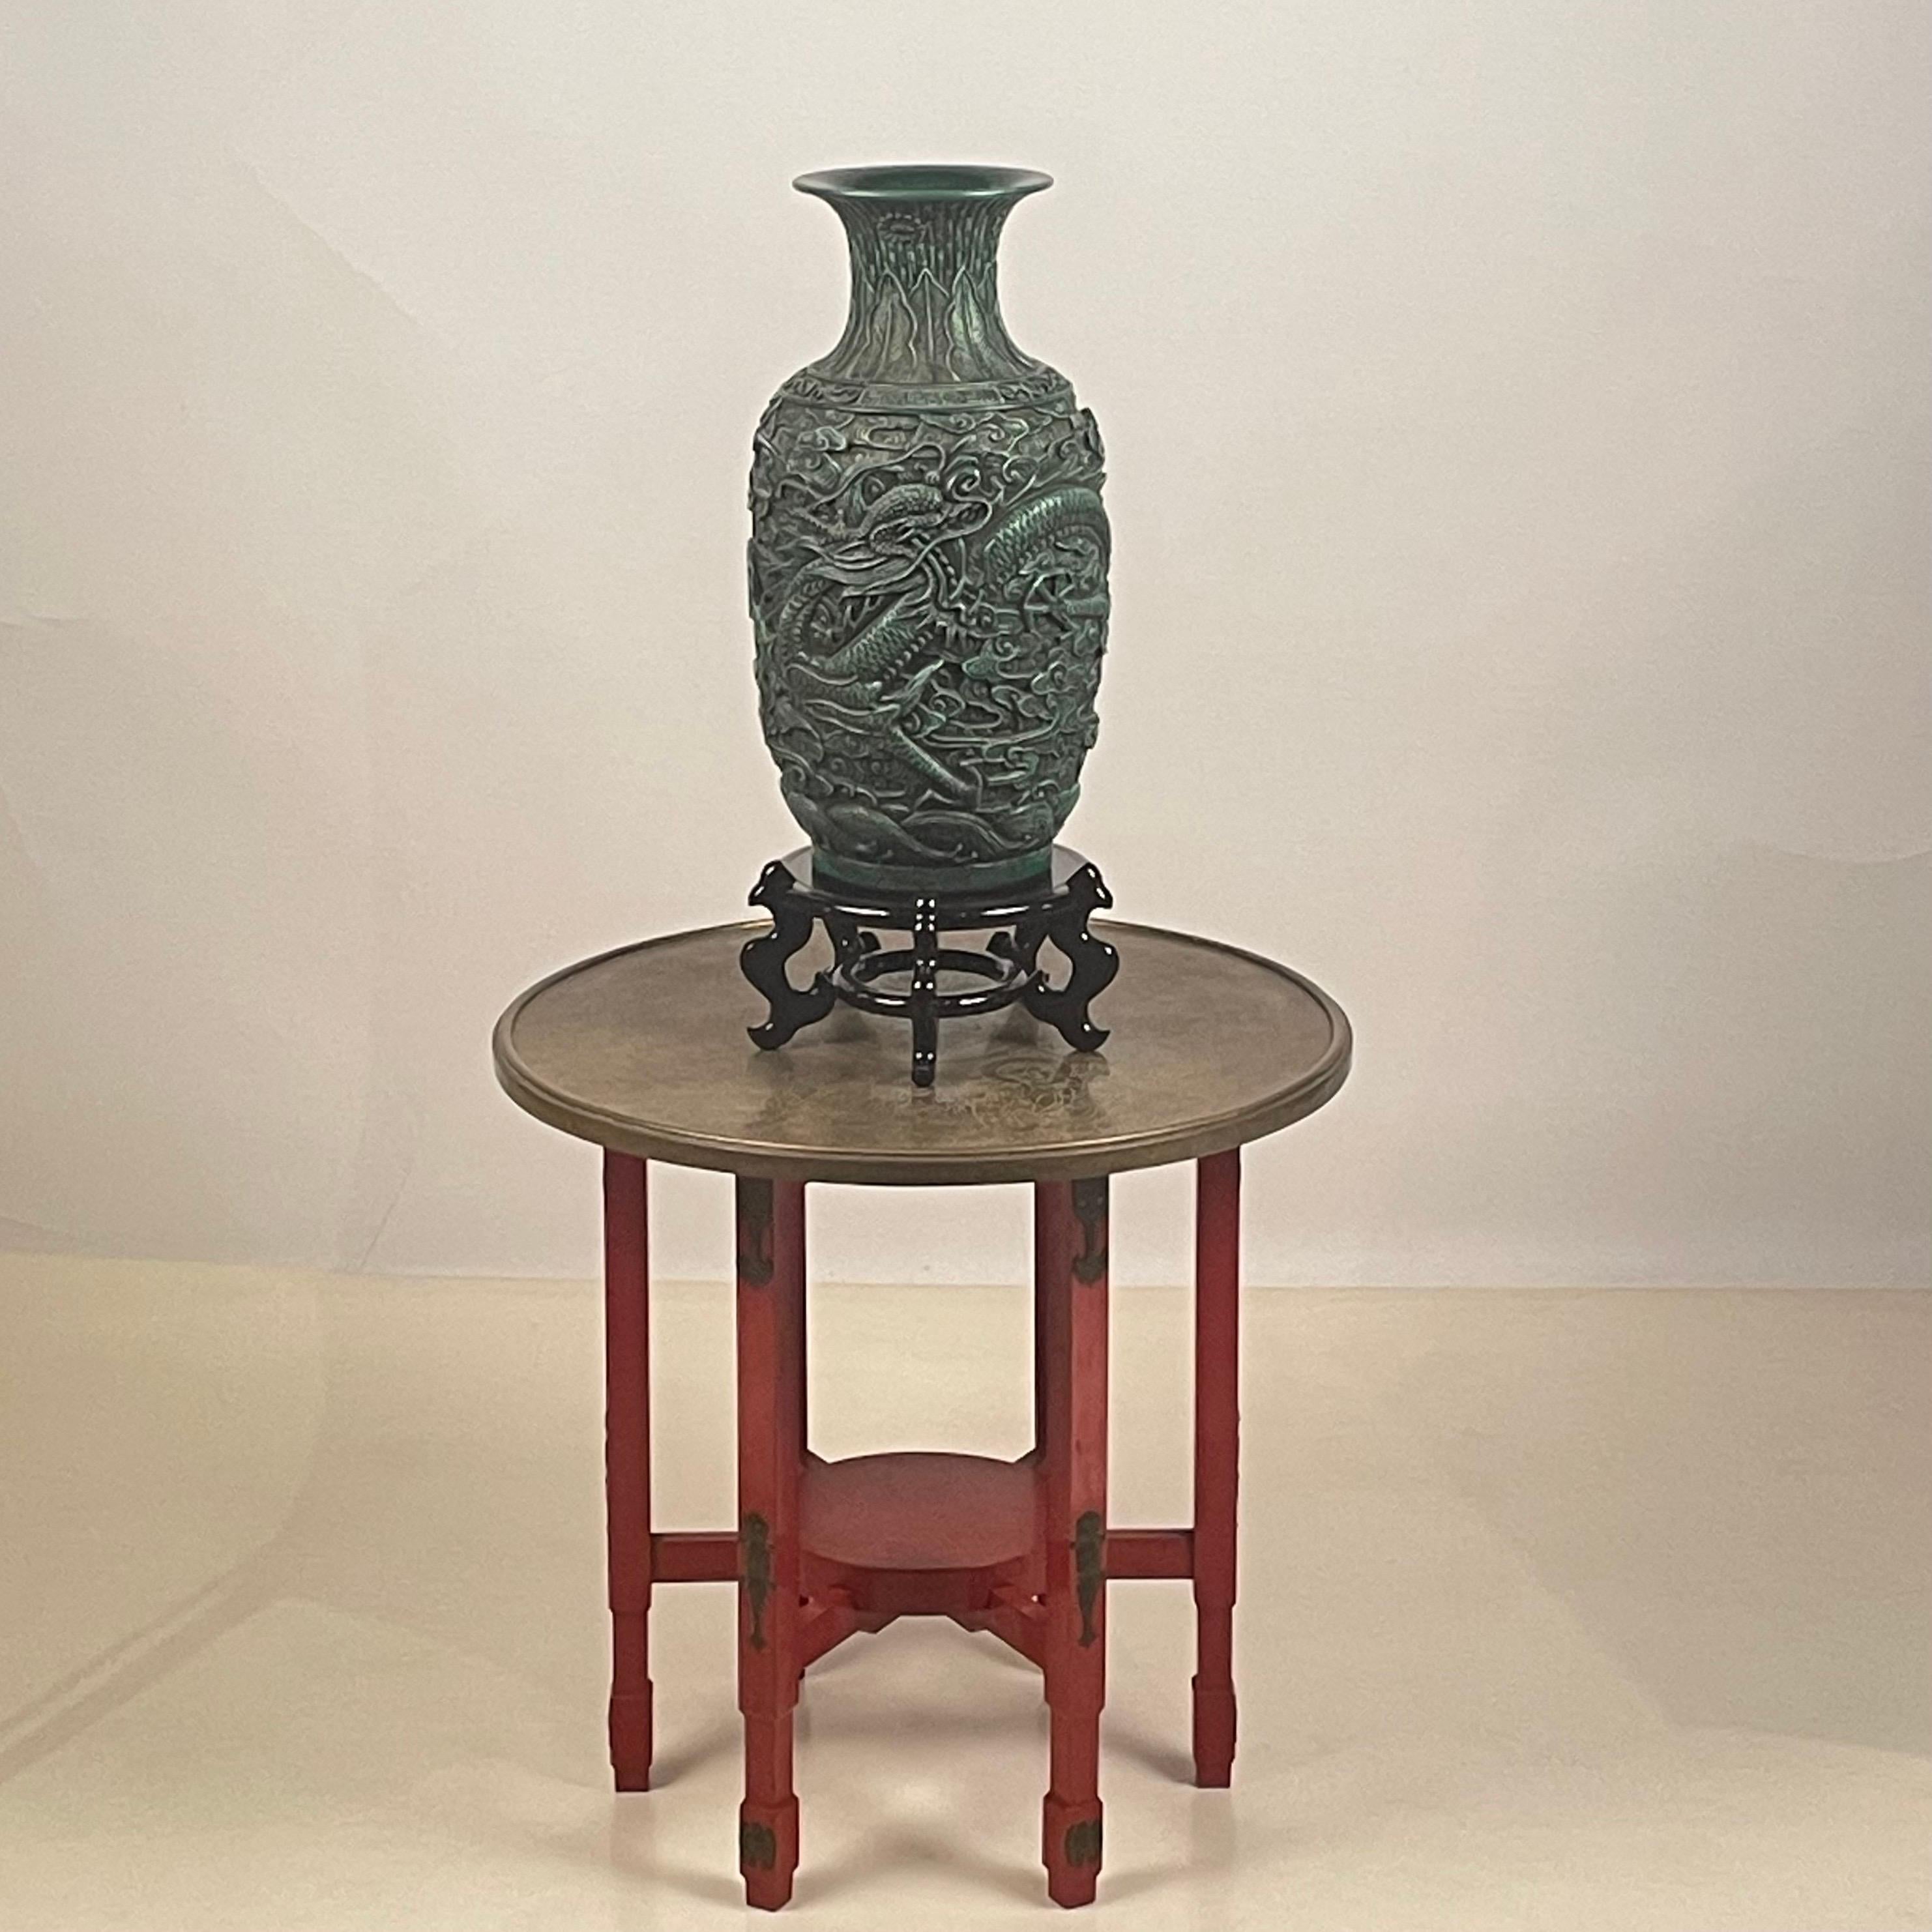 Chinese lacquer and bronze table with green dragon vase the style of Tony Duquette.

Dimensions listed are the overall dimensions of the table plus the vase, as on the main picture.
Table is 23 in. diameter x 22 in. tall.
Vase and stand together